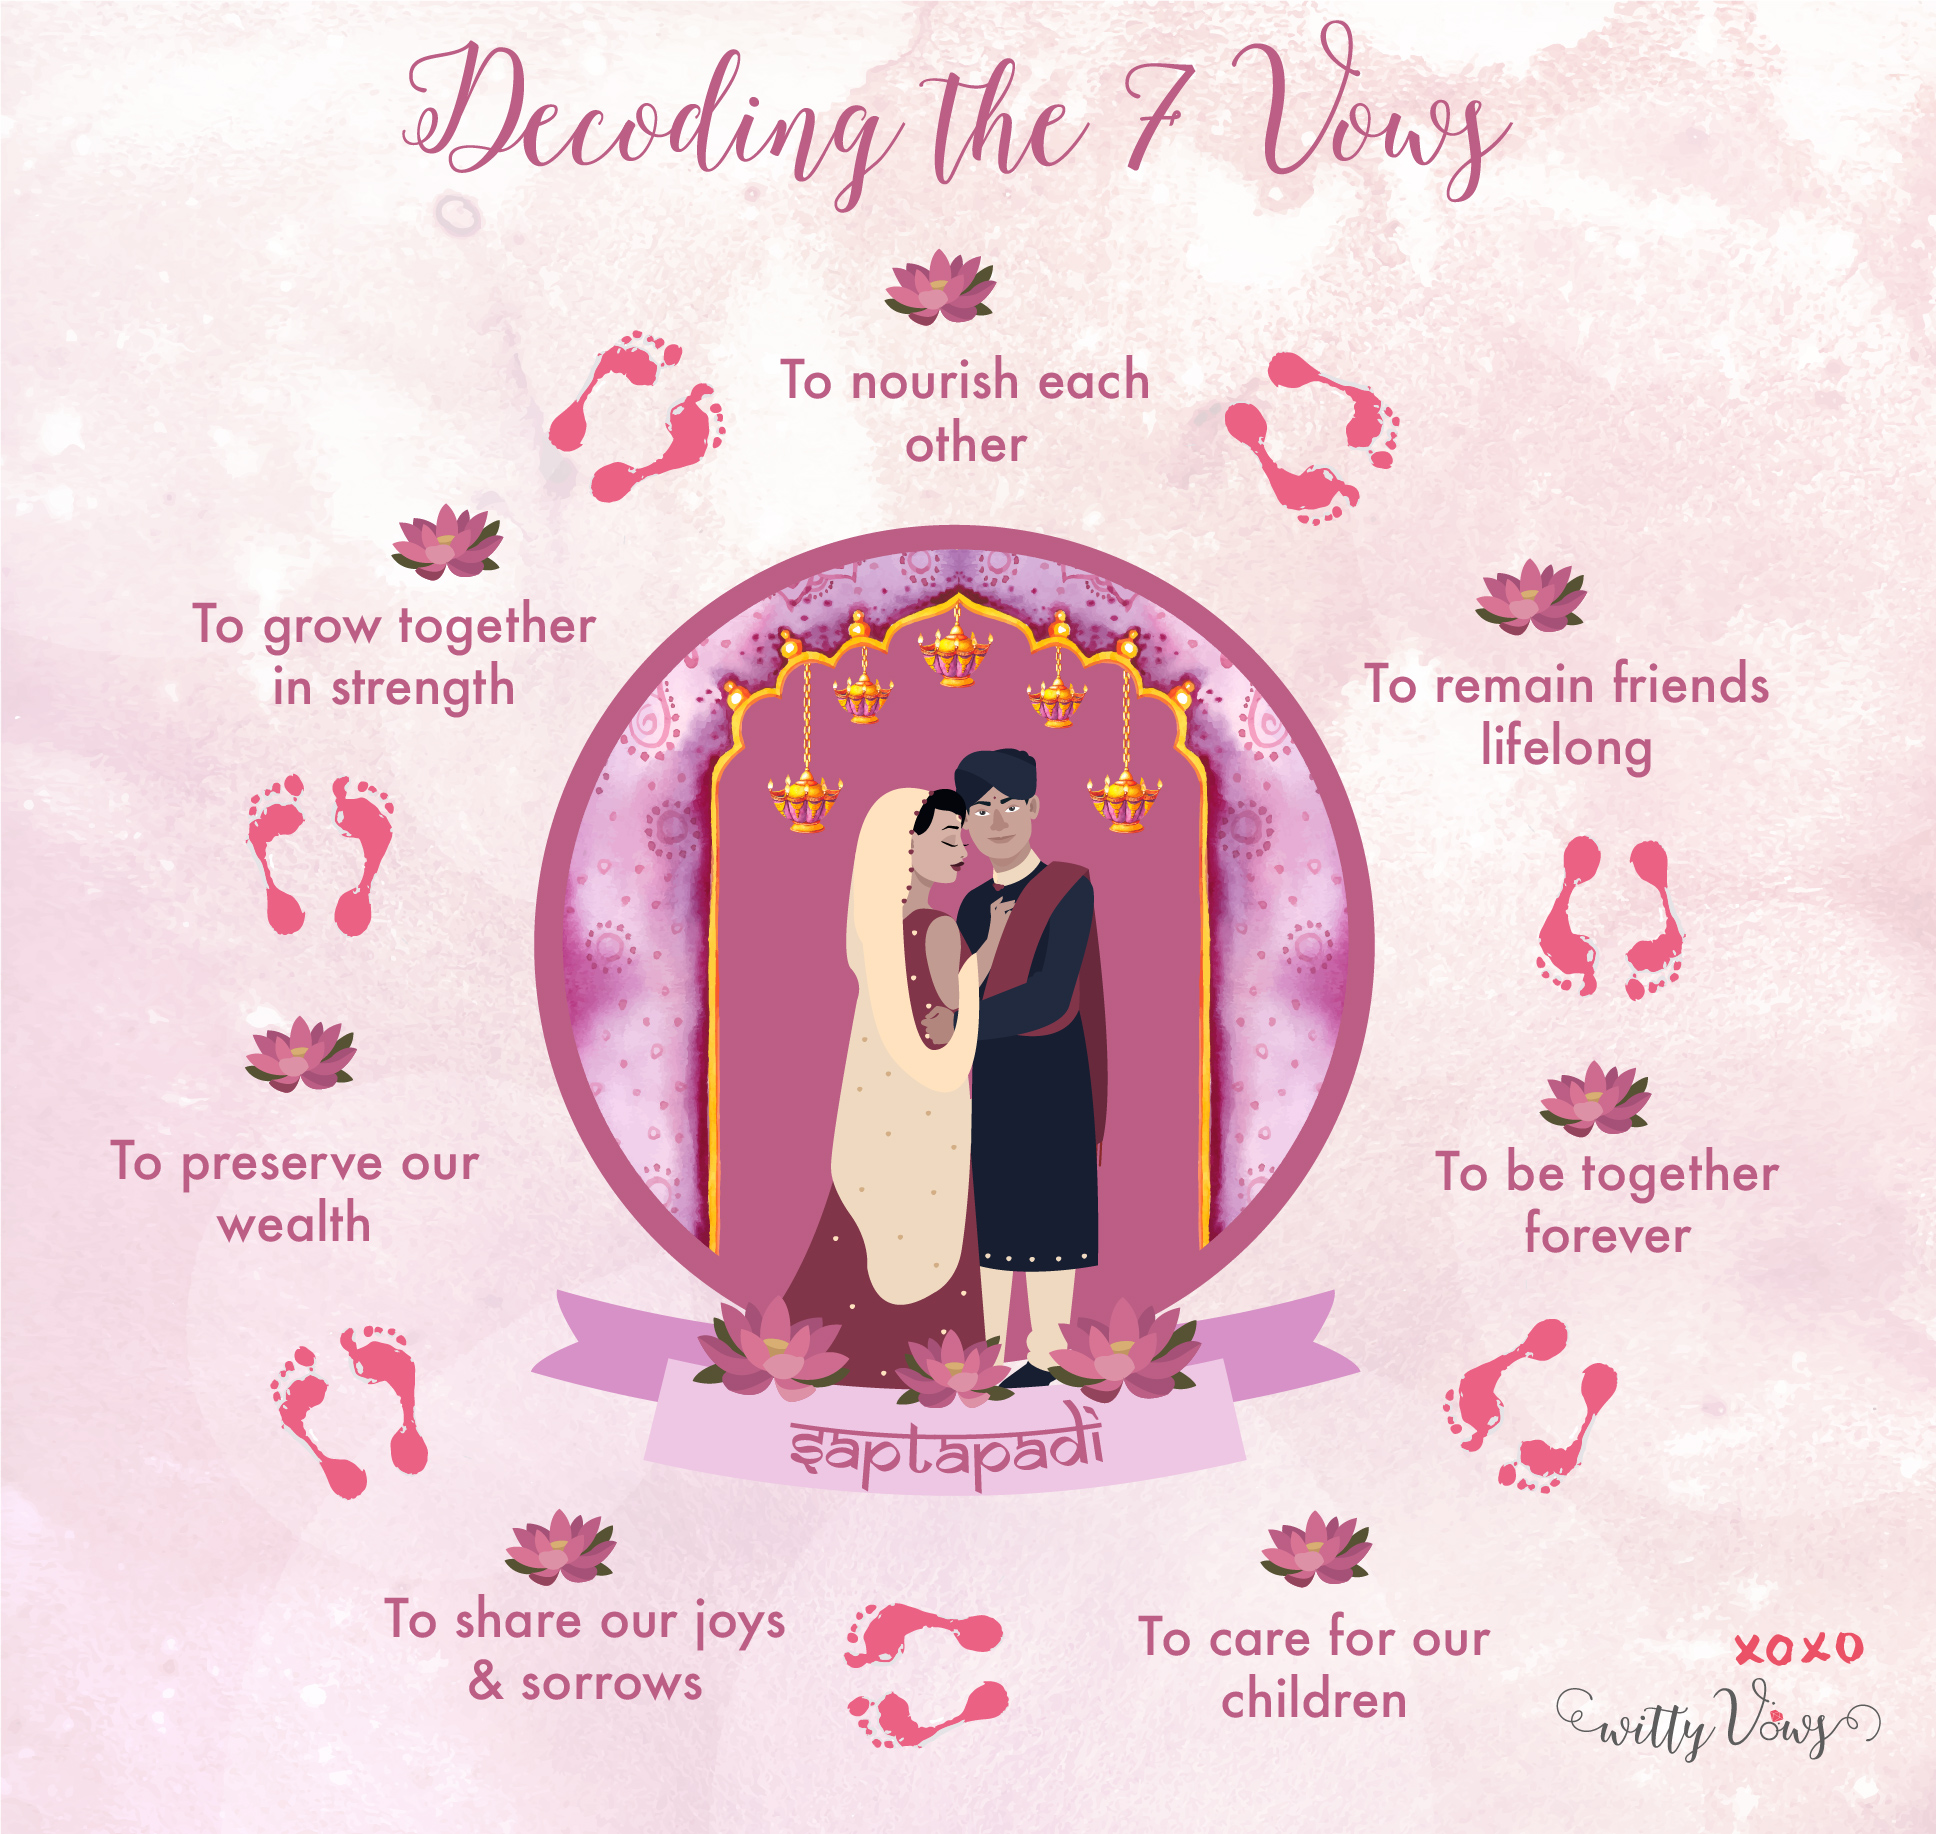 7 Indian Wedding Vows Decoded translations translated